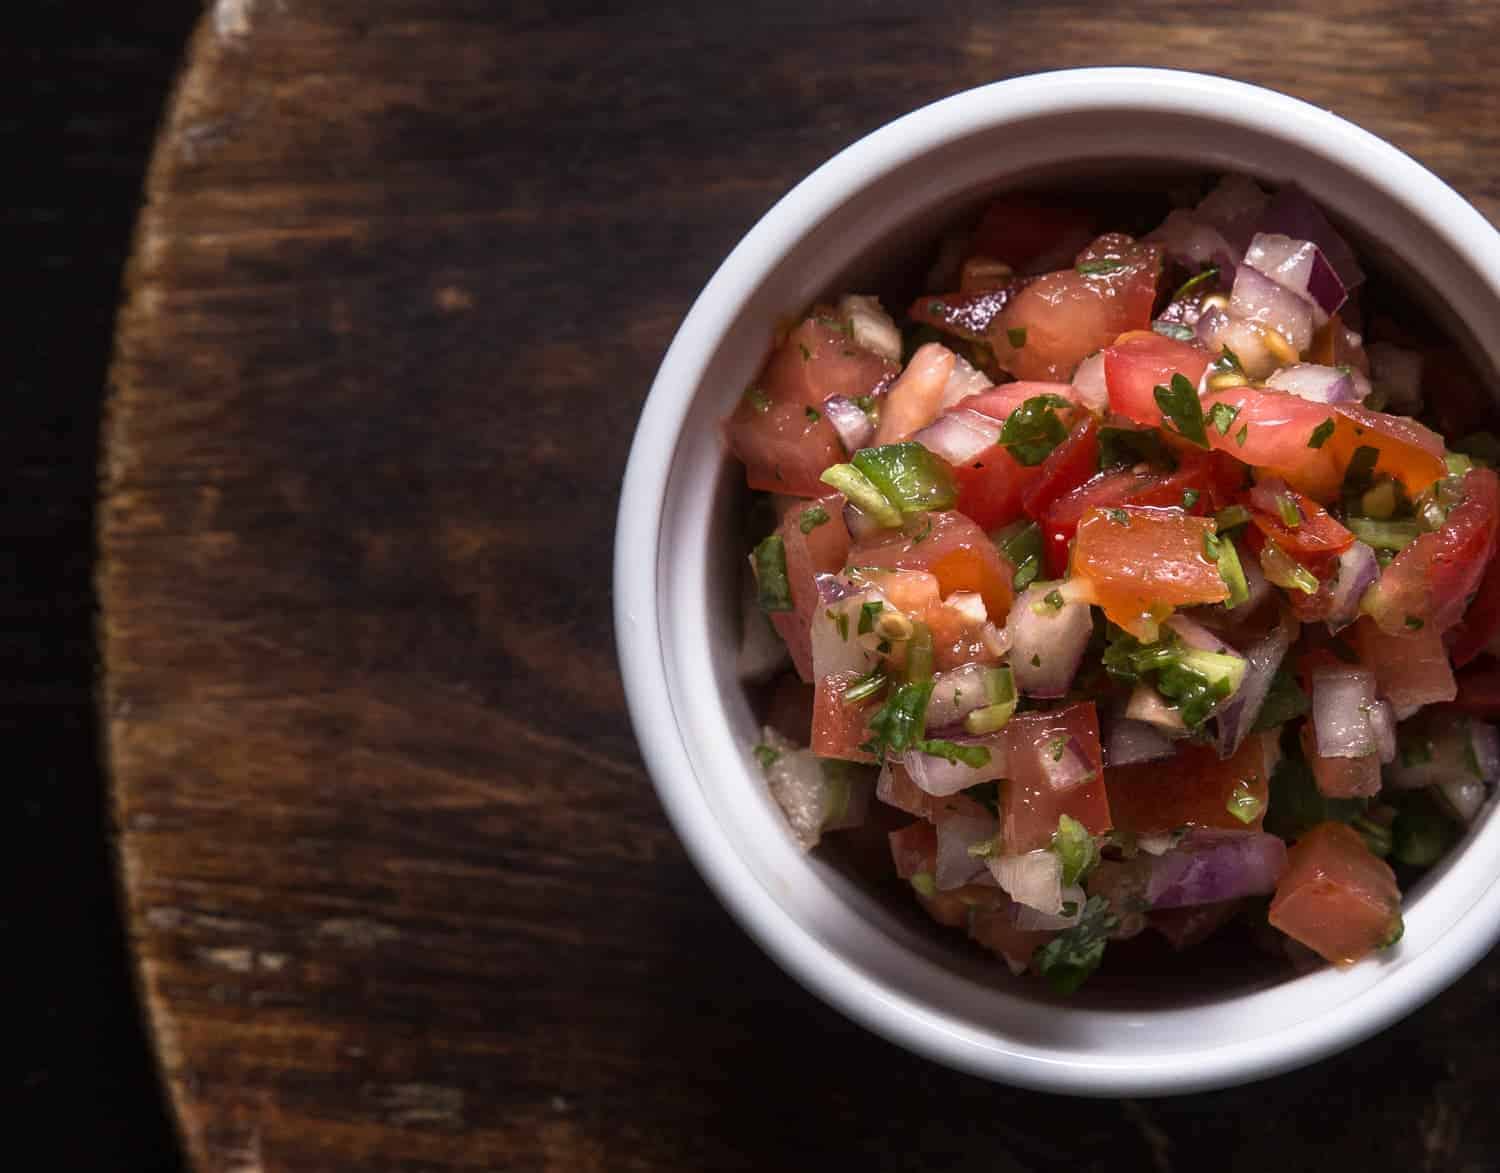 Mexican Homemade Salsa Recipe (Pico de Gallo): excite your taste buds with this easy refreshing Salsa Fresca as a side dish, dip, or topping for tacos.